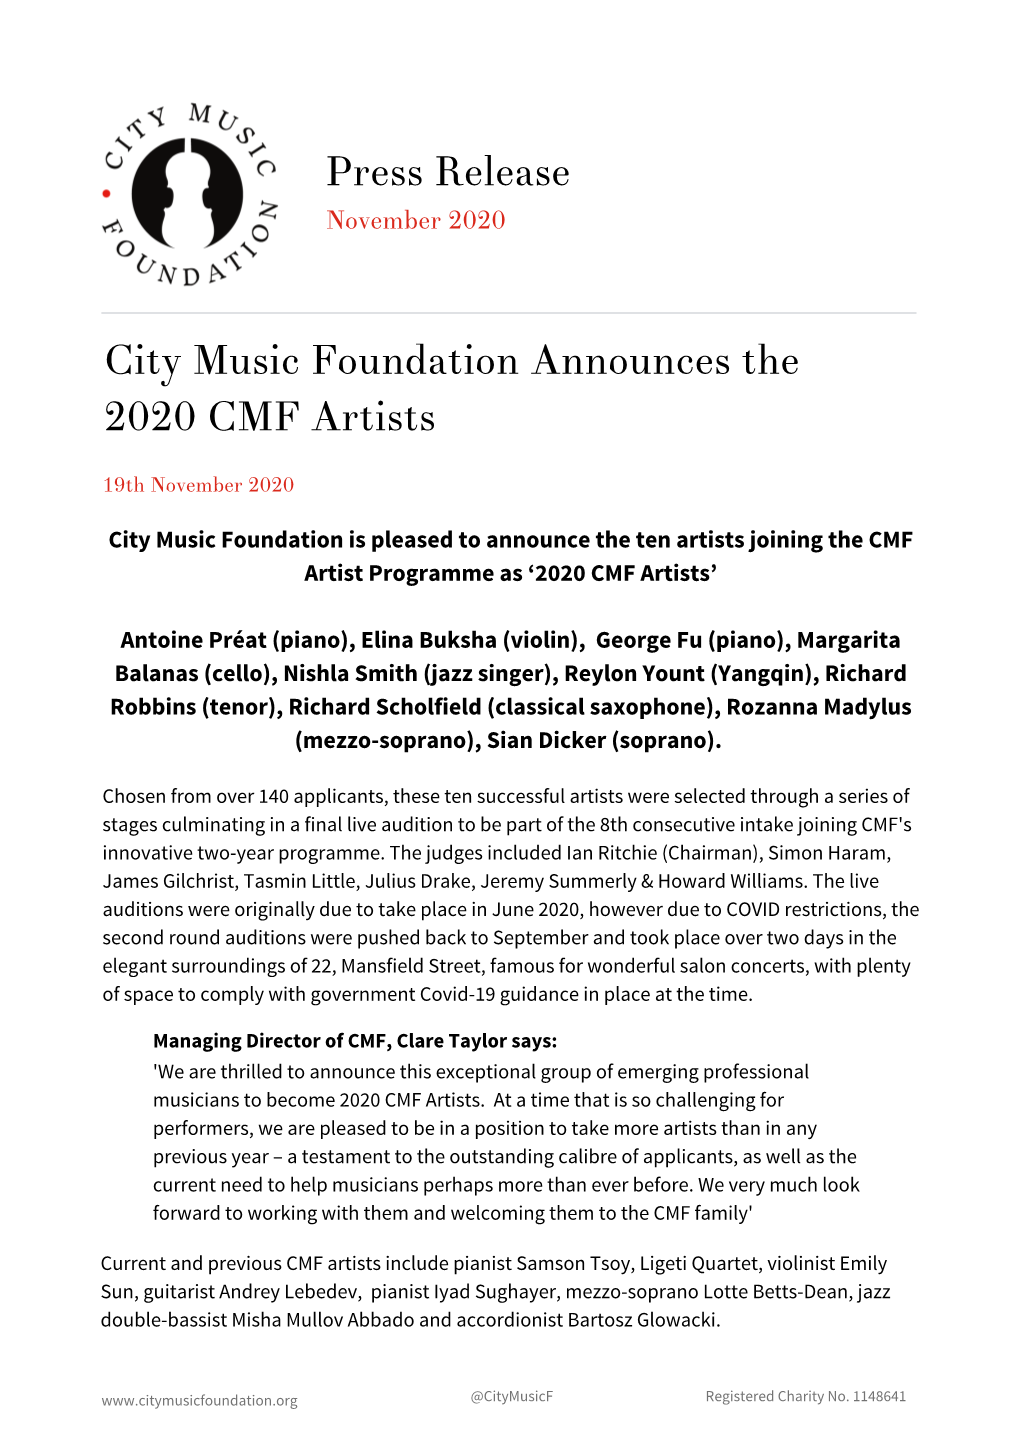 City Music Foundation 2020 New Artists Press Release